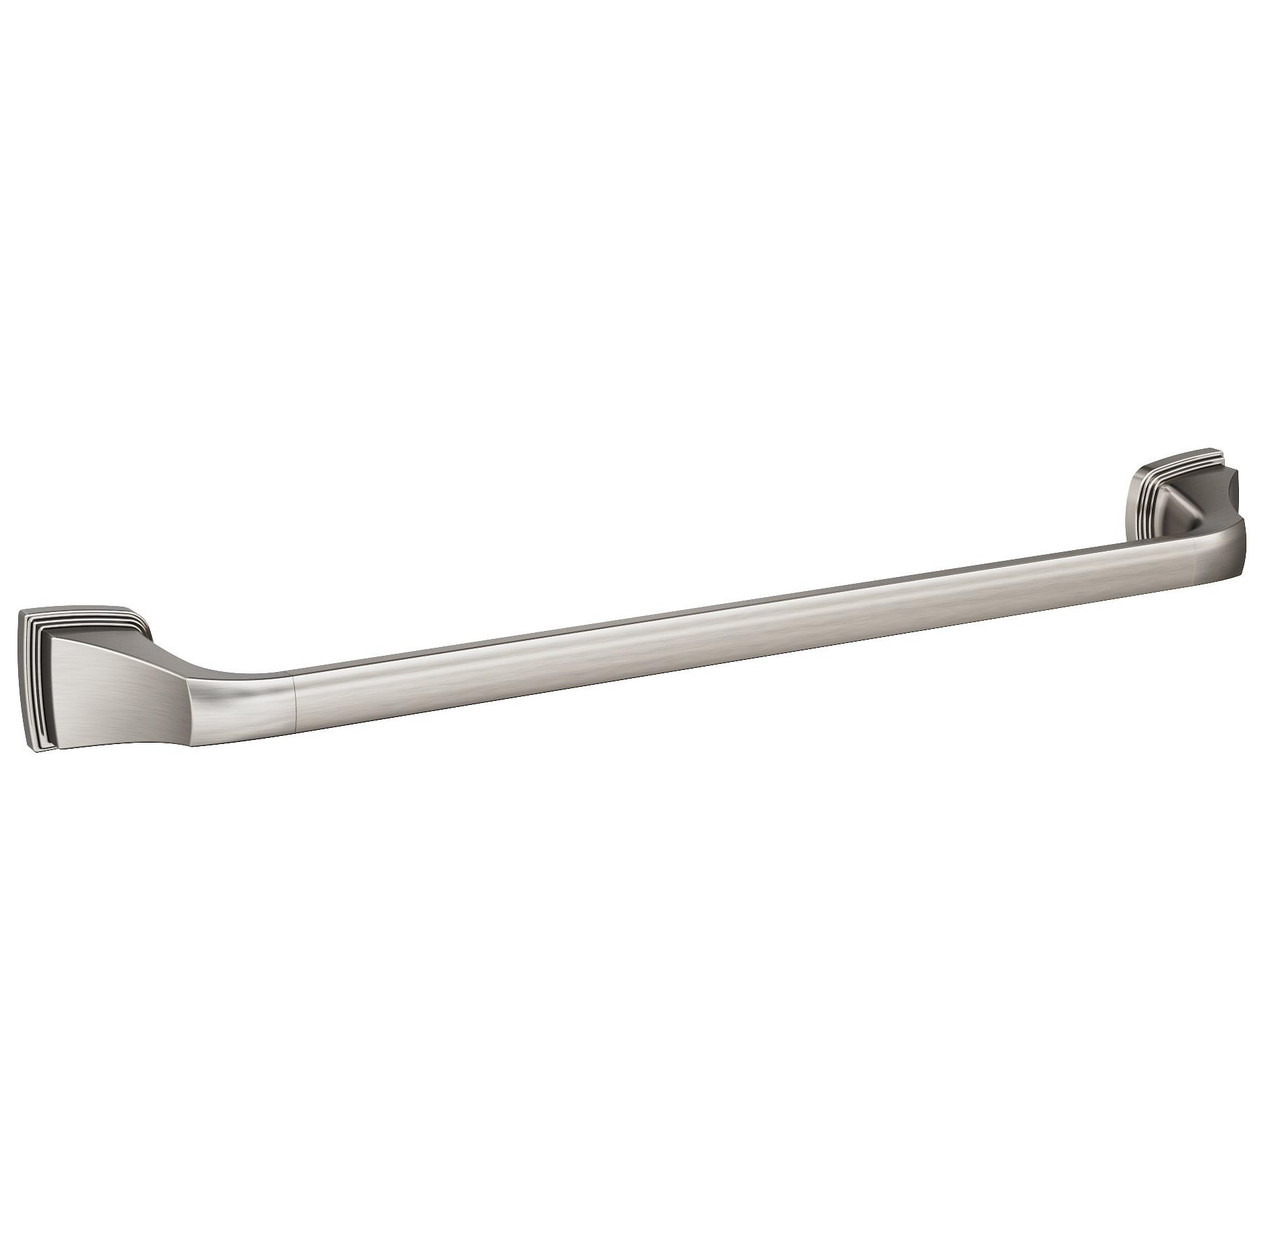 Amerock Revitalize Traditional 18 in (457 mm) Towel Bar BH36033